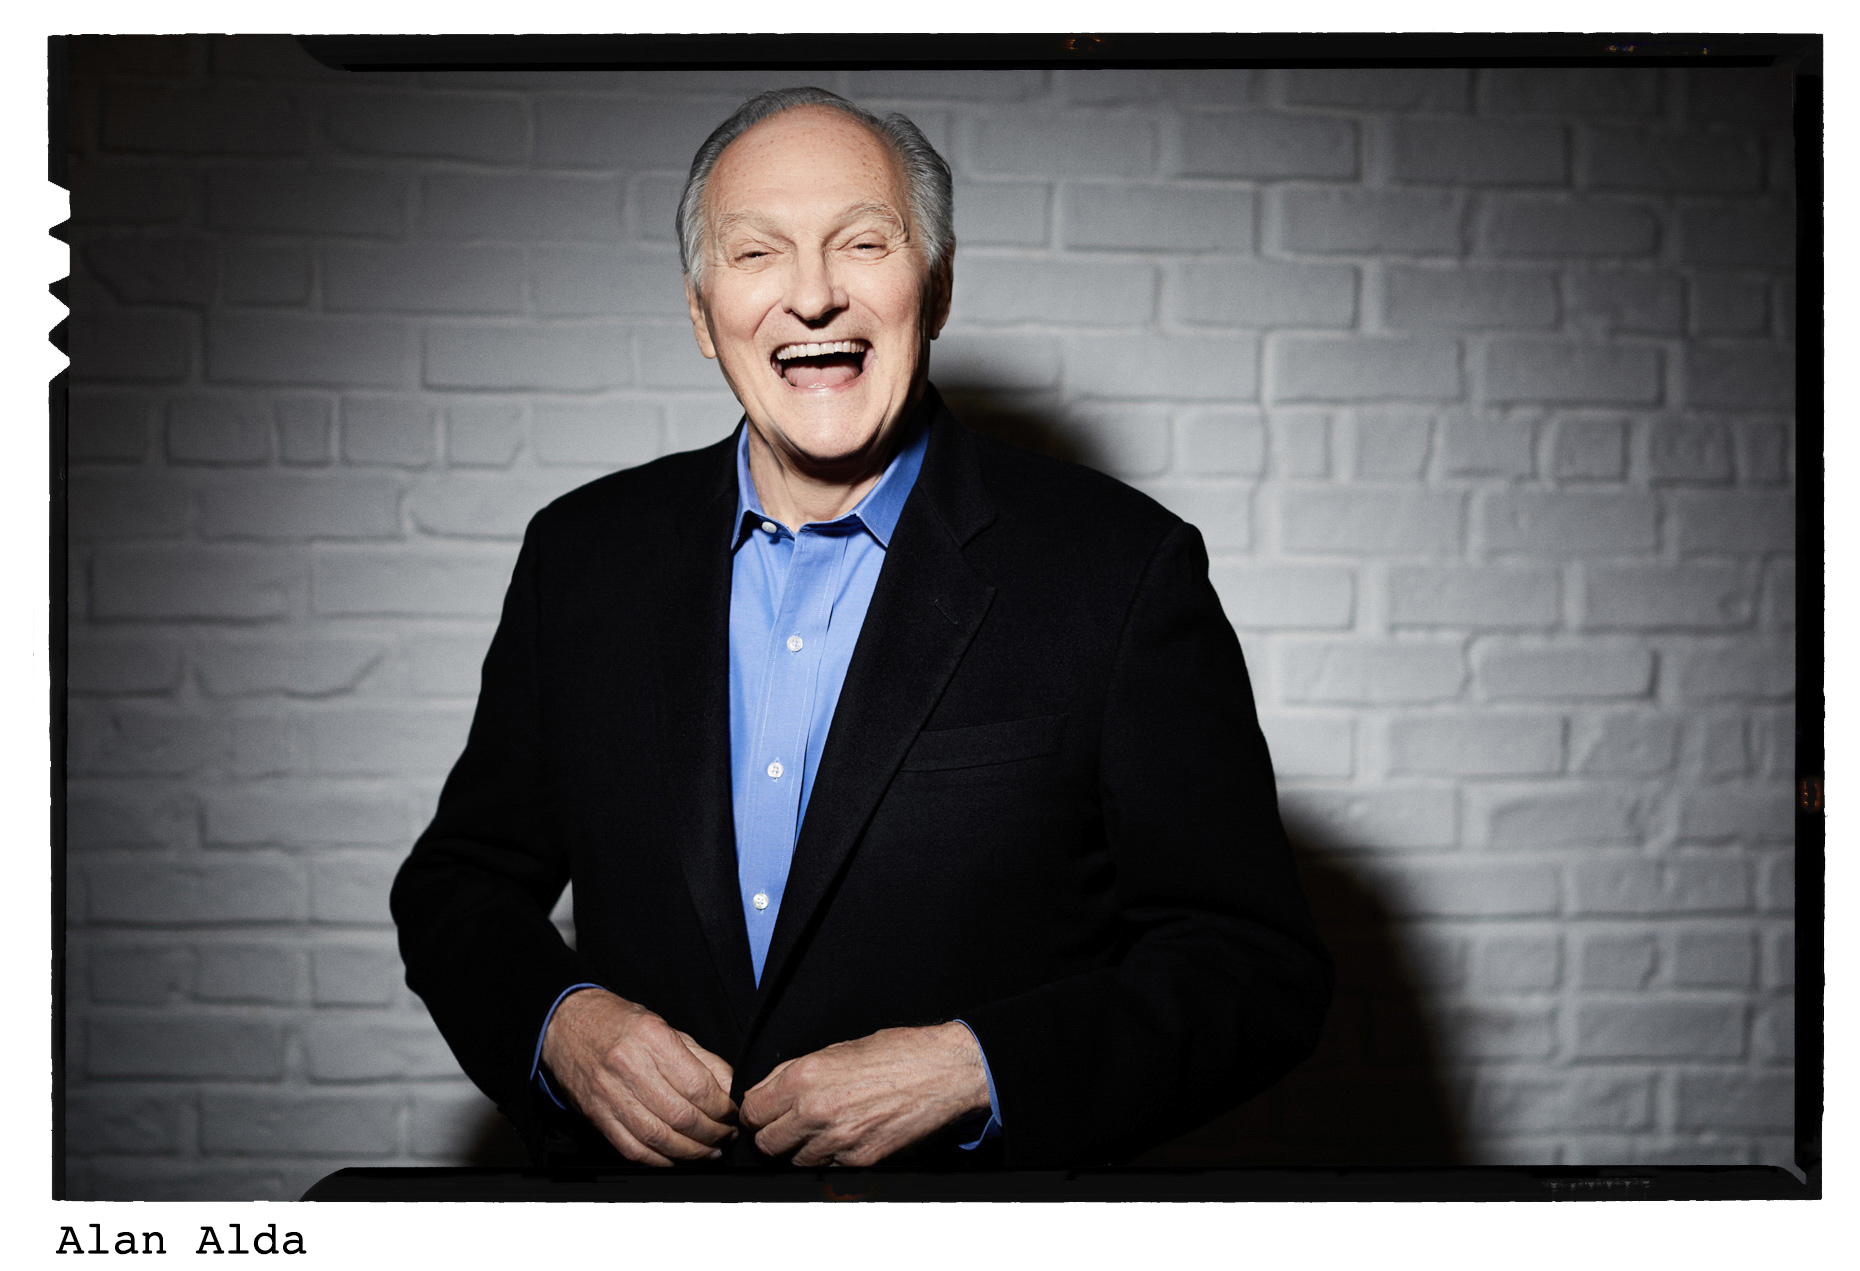 Alan Alda and Kathy Connell Portrait Session